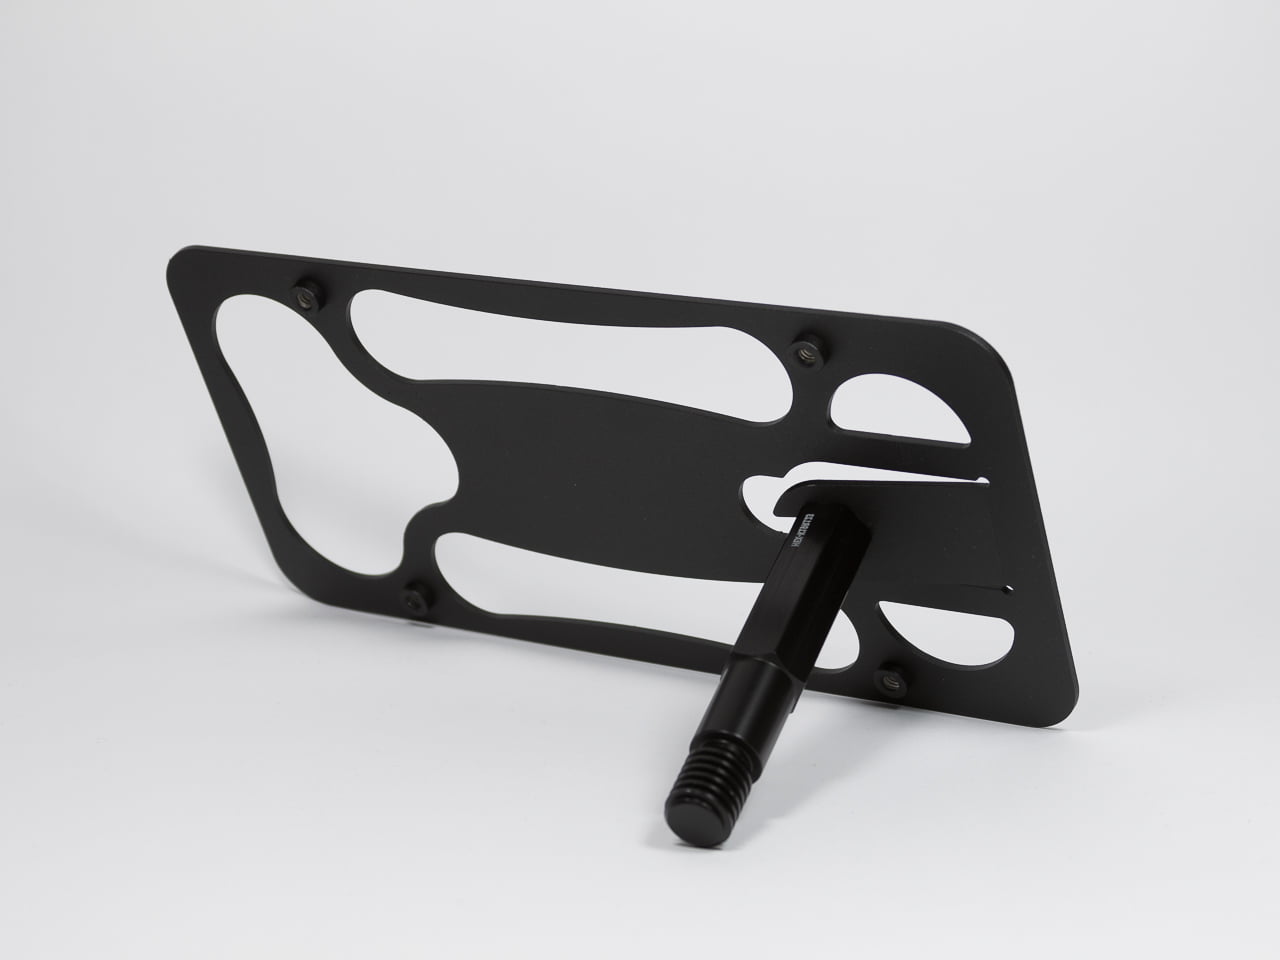 No Drilling Made in USA CravenSpeed The Platypus License Plate Mount for MINI Coupe R58 Made of Stainless Steel & Aluminum | 2012-2015 Installs in Seconds 